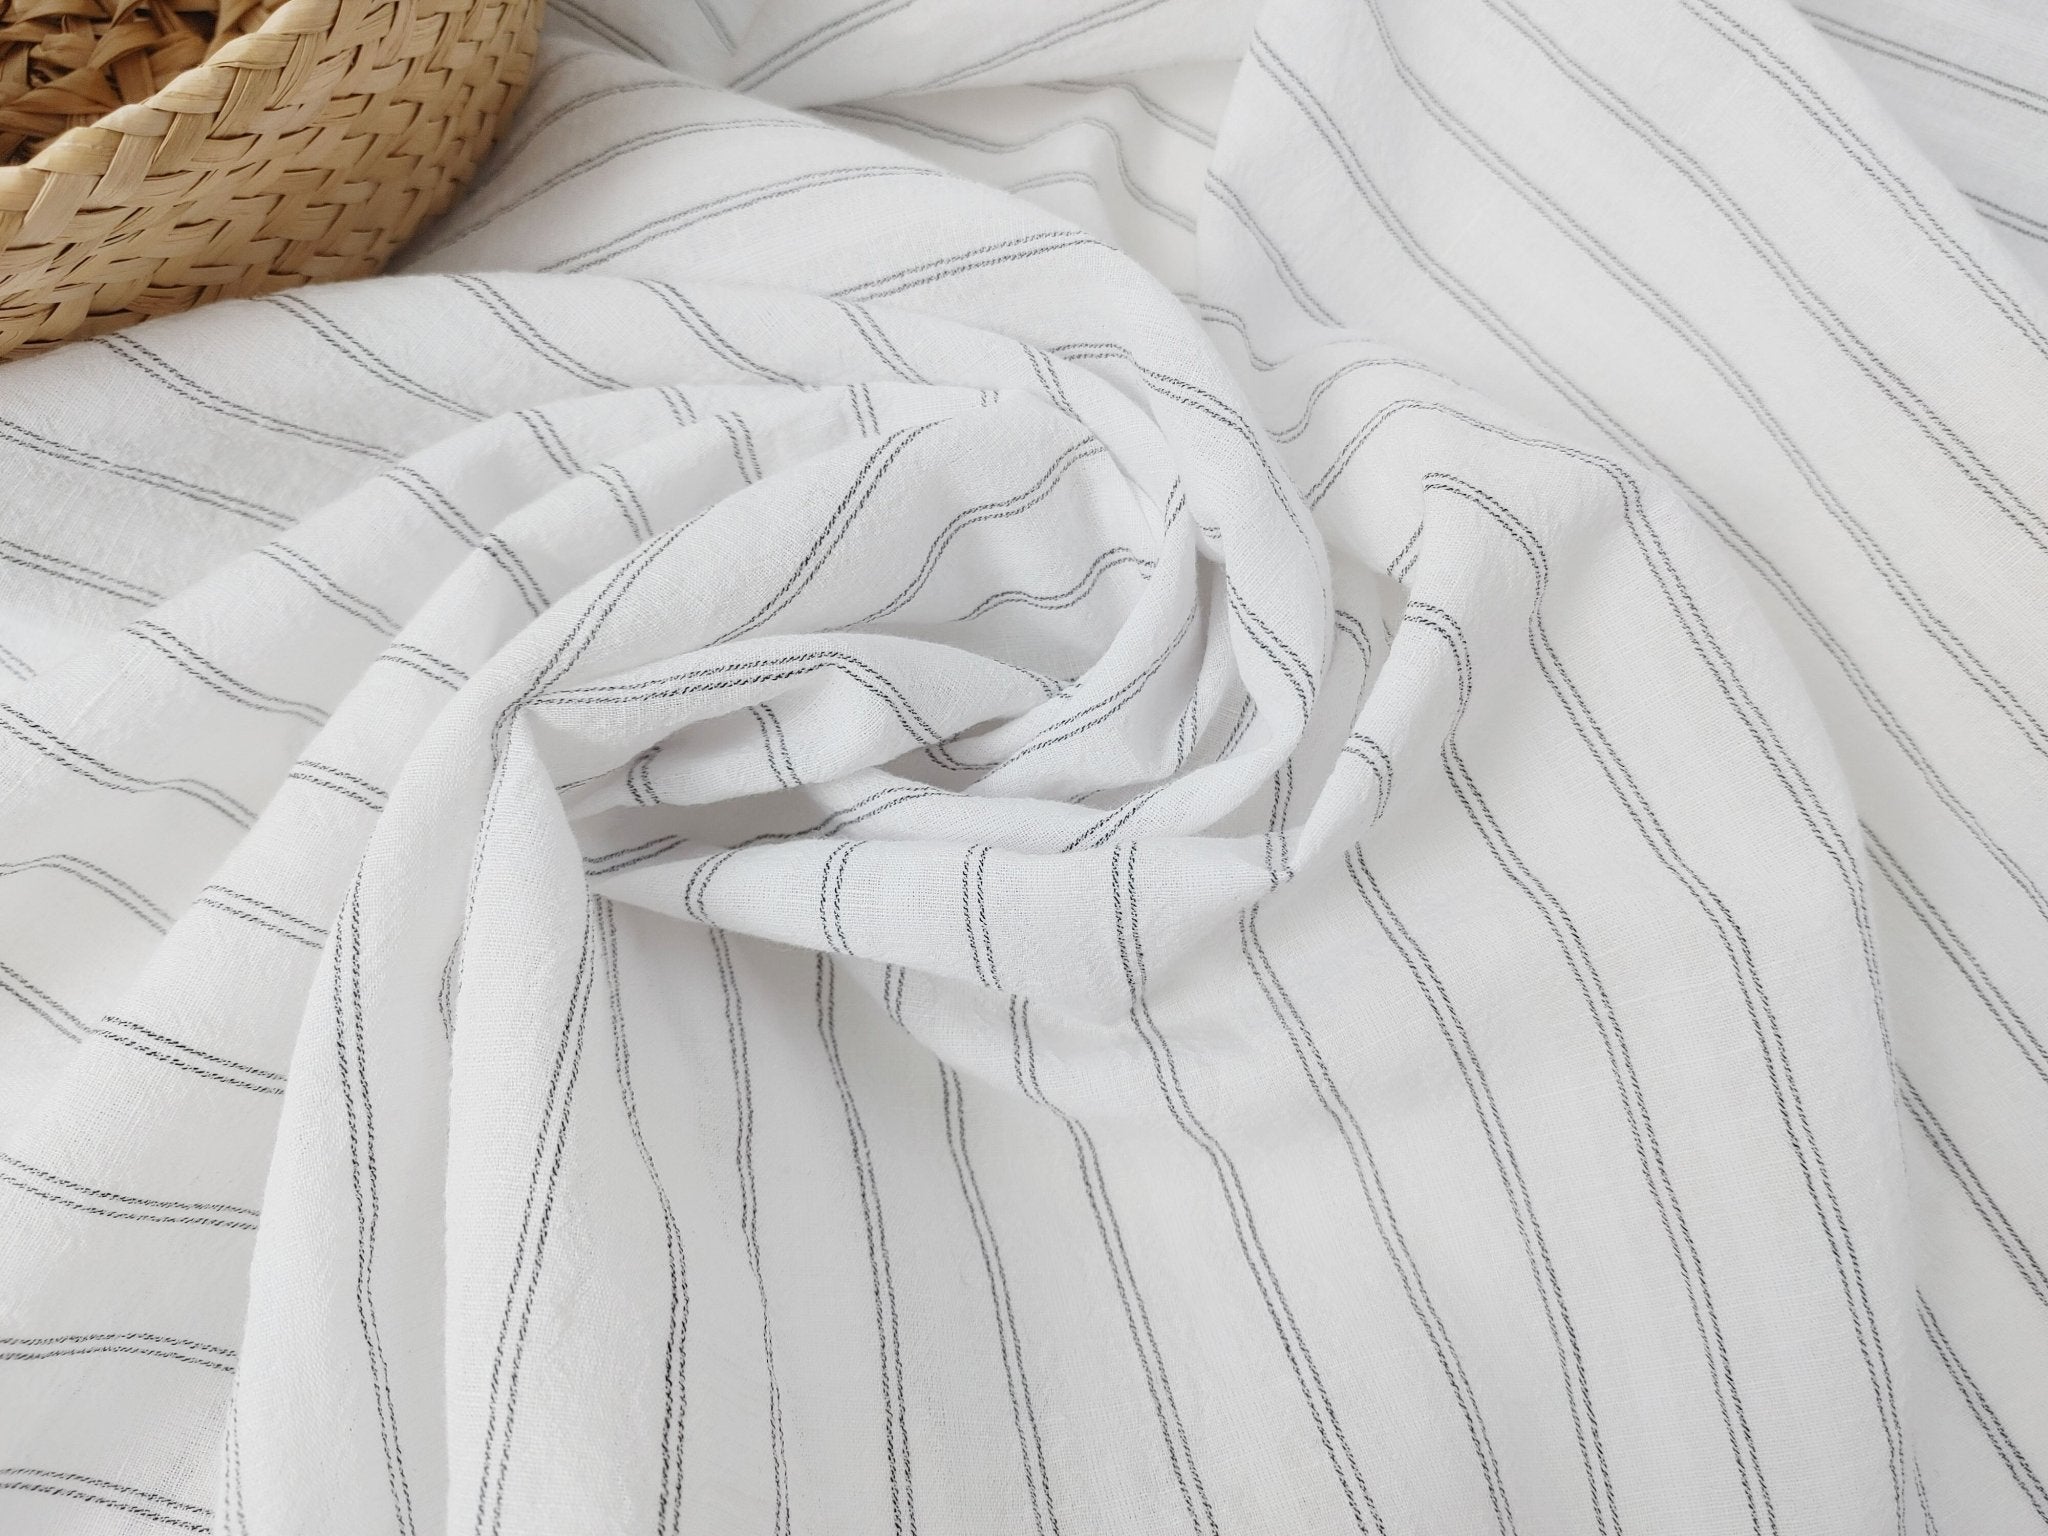 Airy Stripes: Linen with High-Twisted Cotton Lightweight Stripe Fabric 6109 6110 6111 6049 - The Linen Lab - Blue